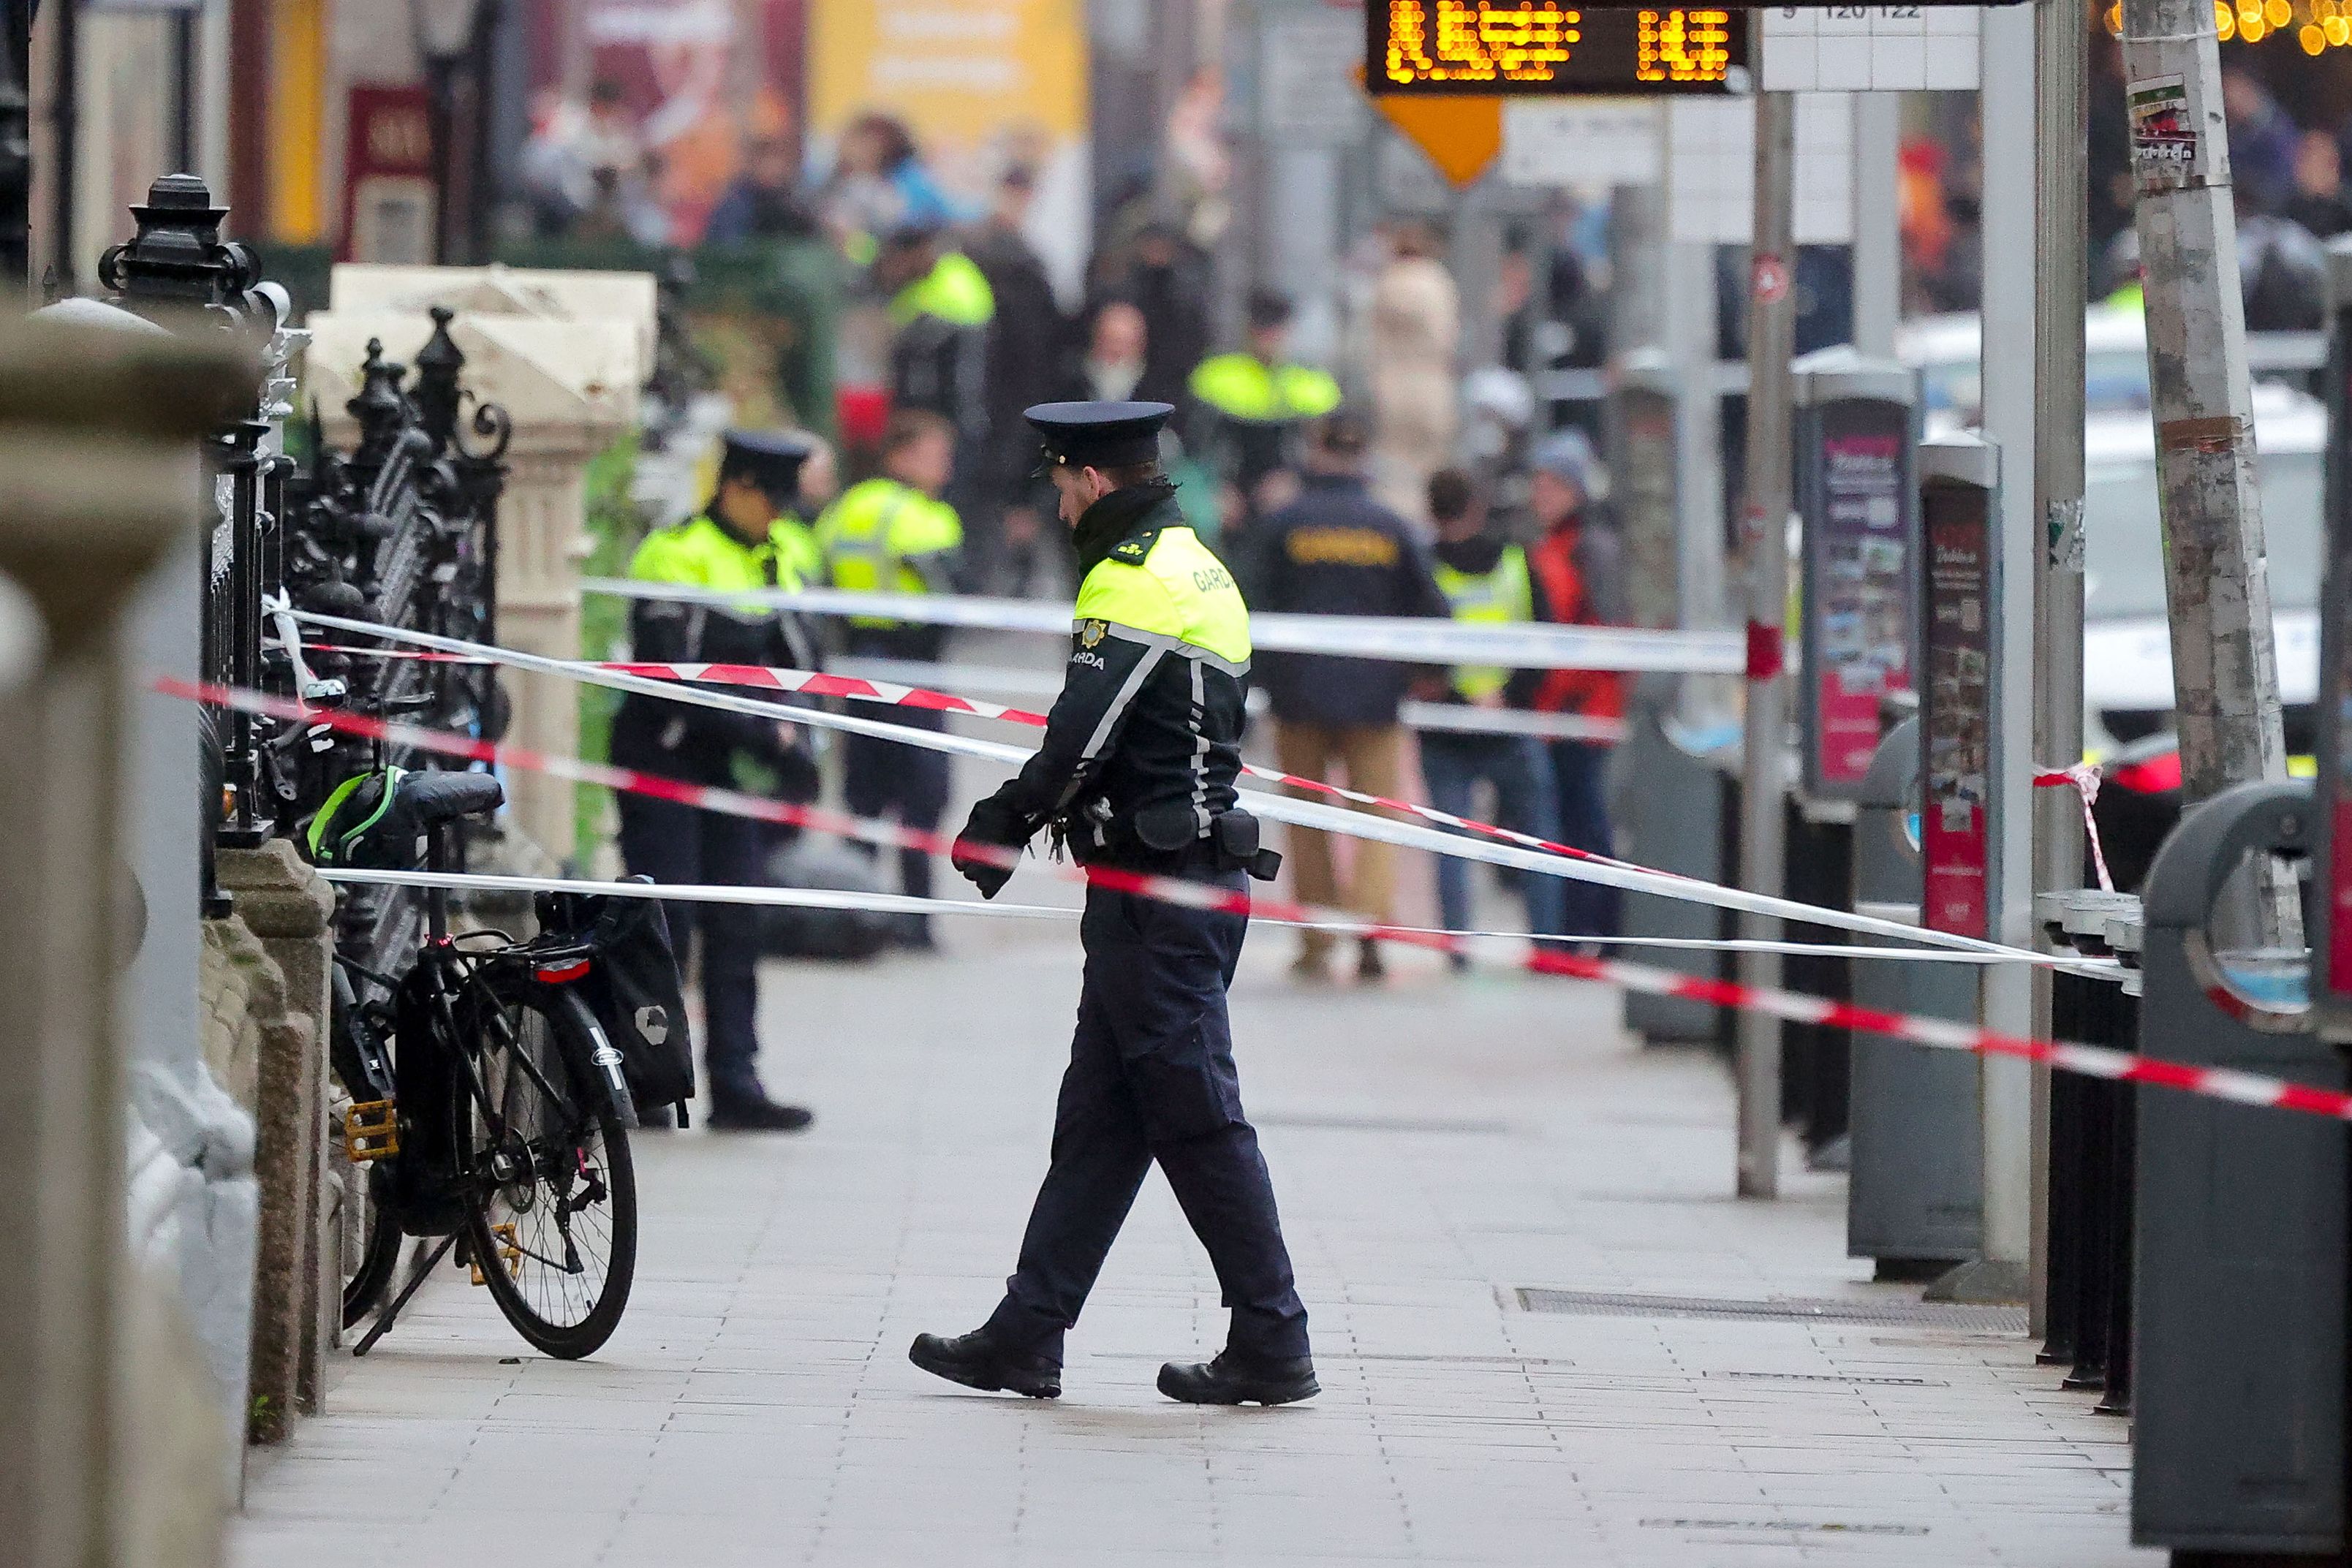 Special security in place for Algerian man wrongly identified as suspect for Parnell Square stabbings